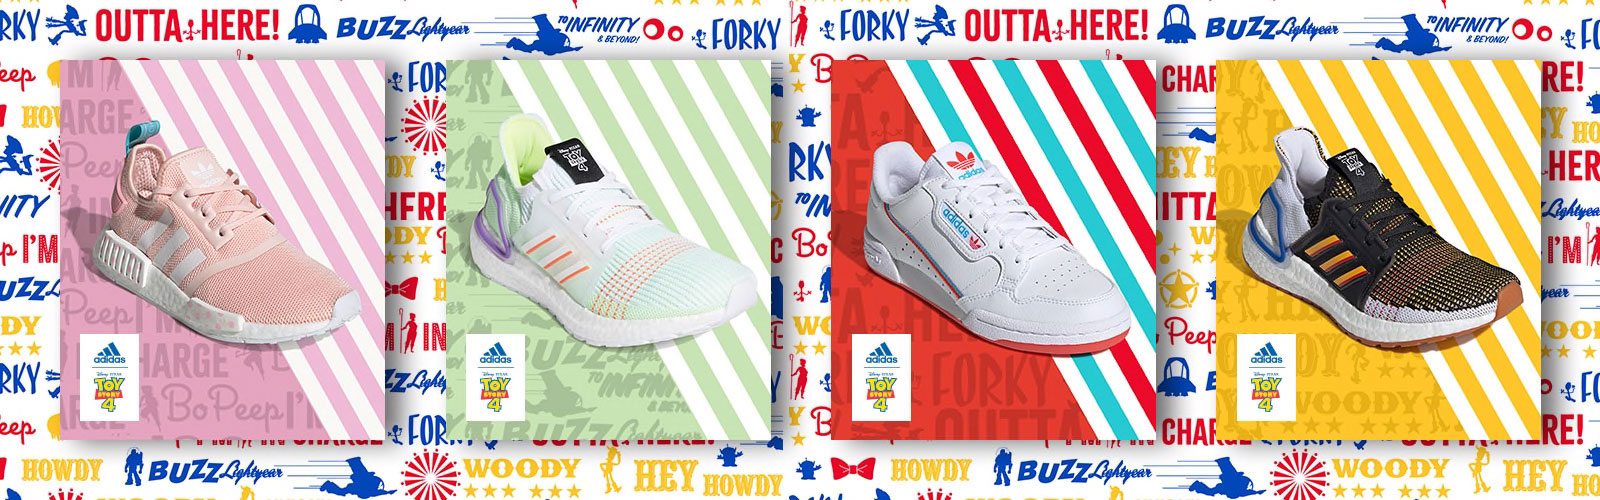 toy story 4 adidas shoes